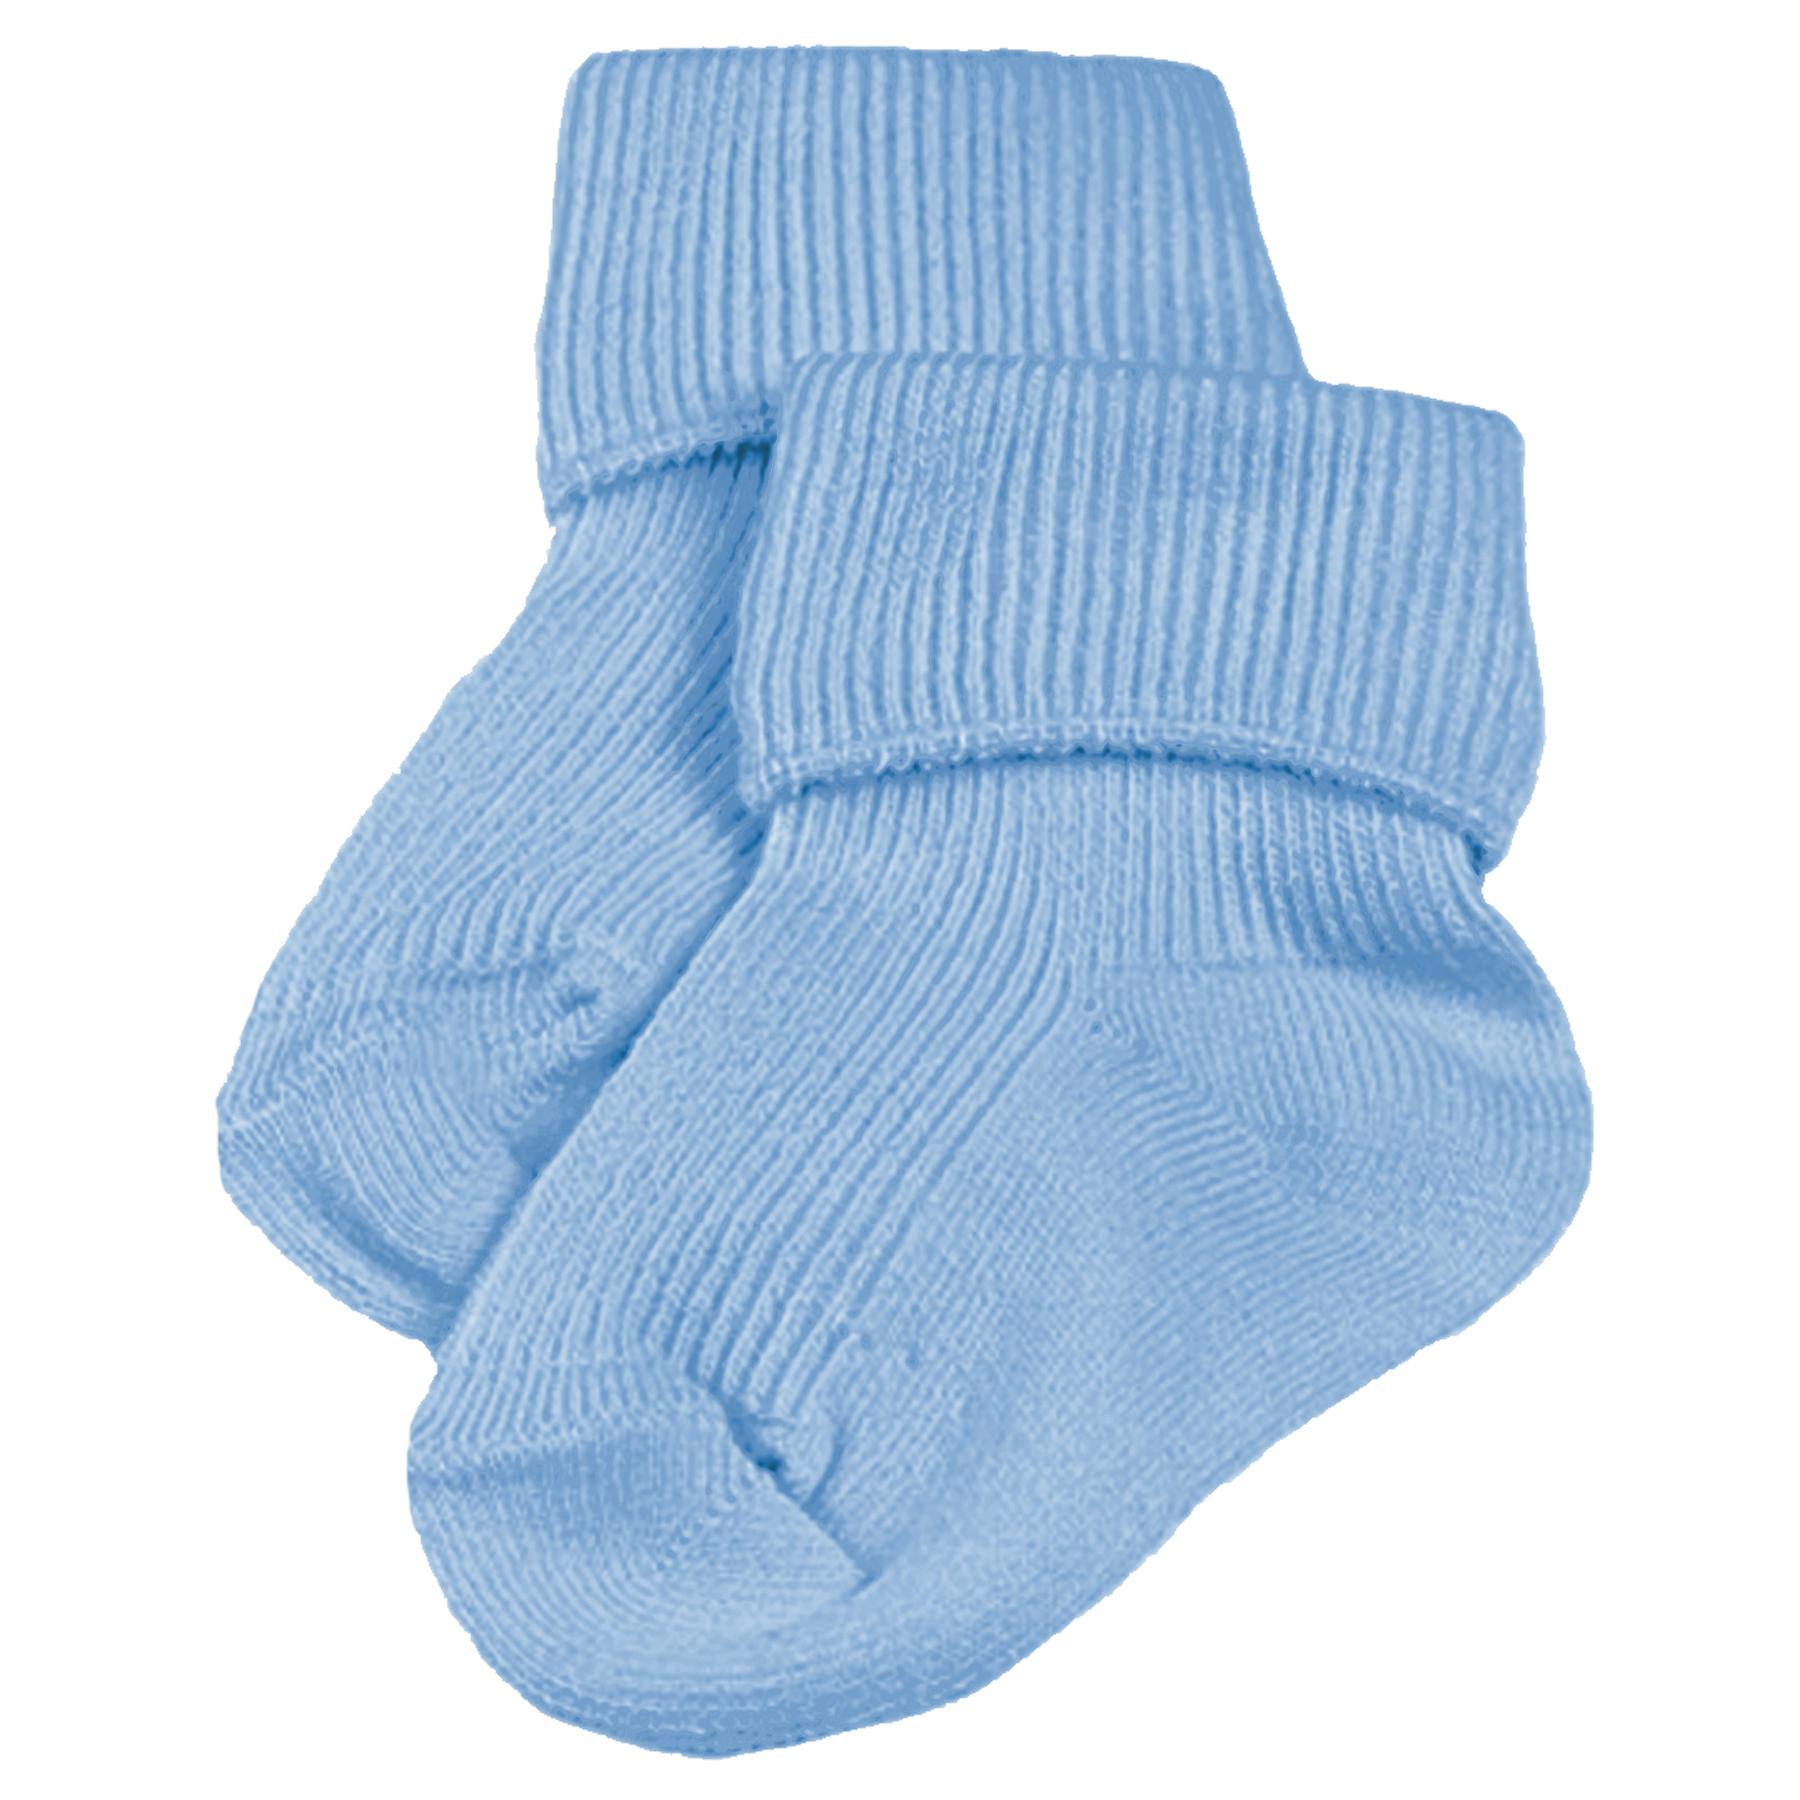 Nifty Turn Over Baby Ankle Socks Blue